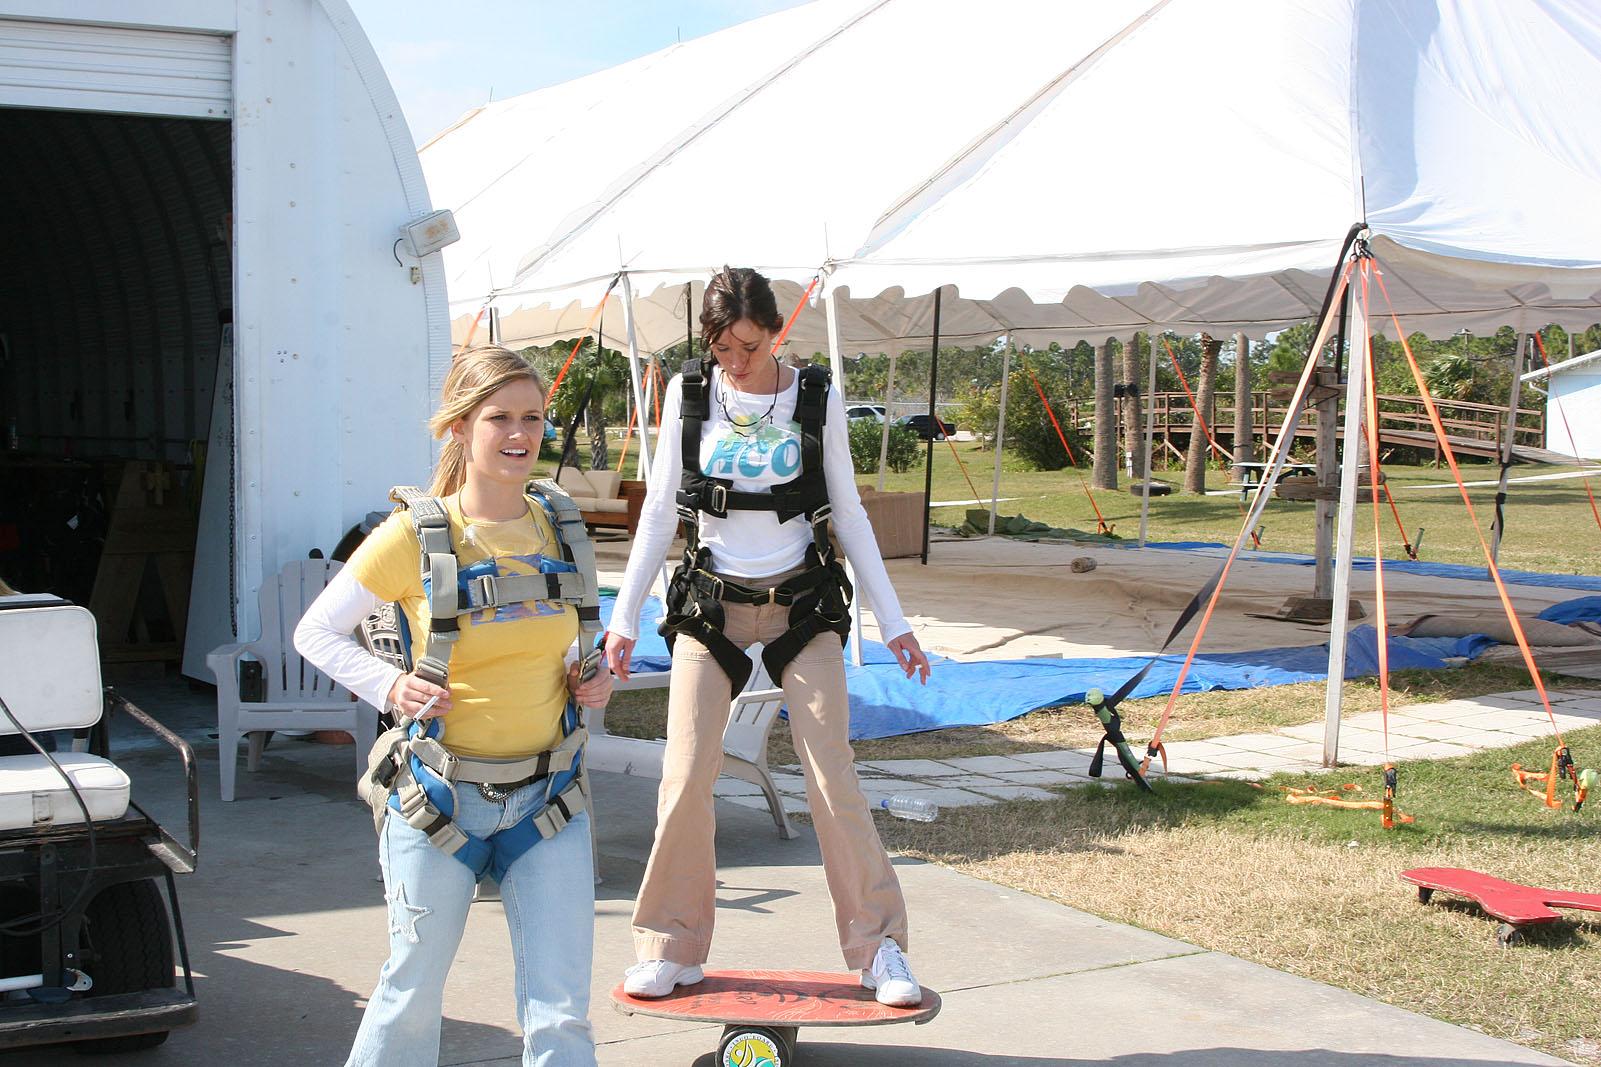 Pictures of Samantha Gauge and Brooke Skye going sky diving #53557968